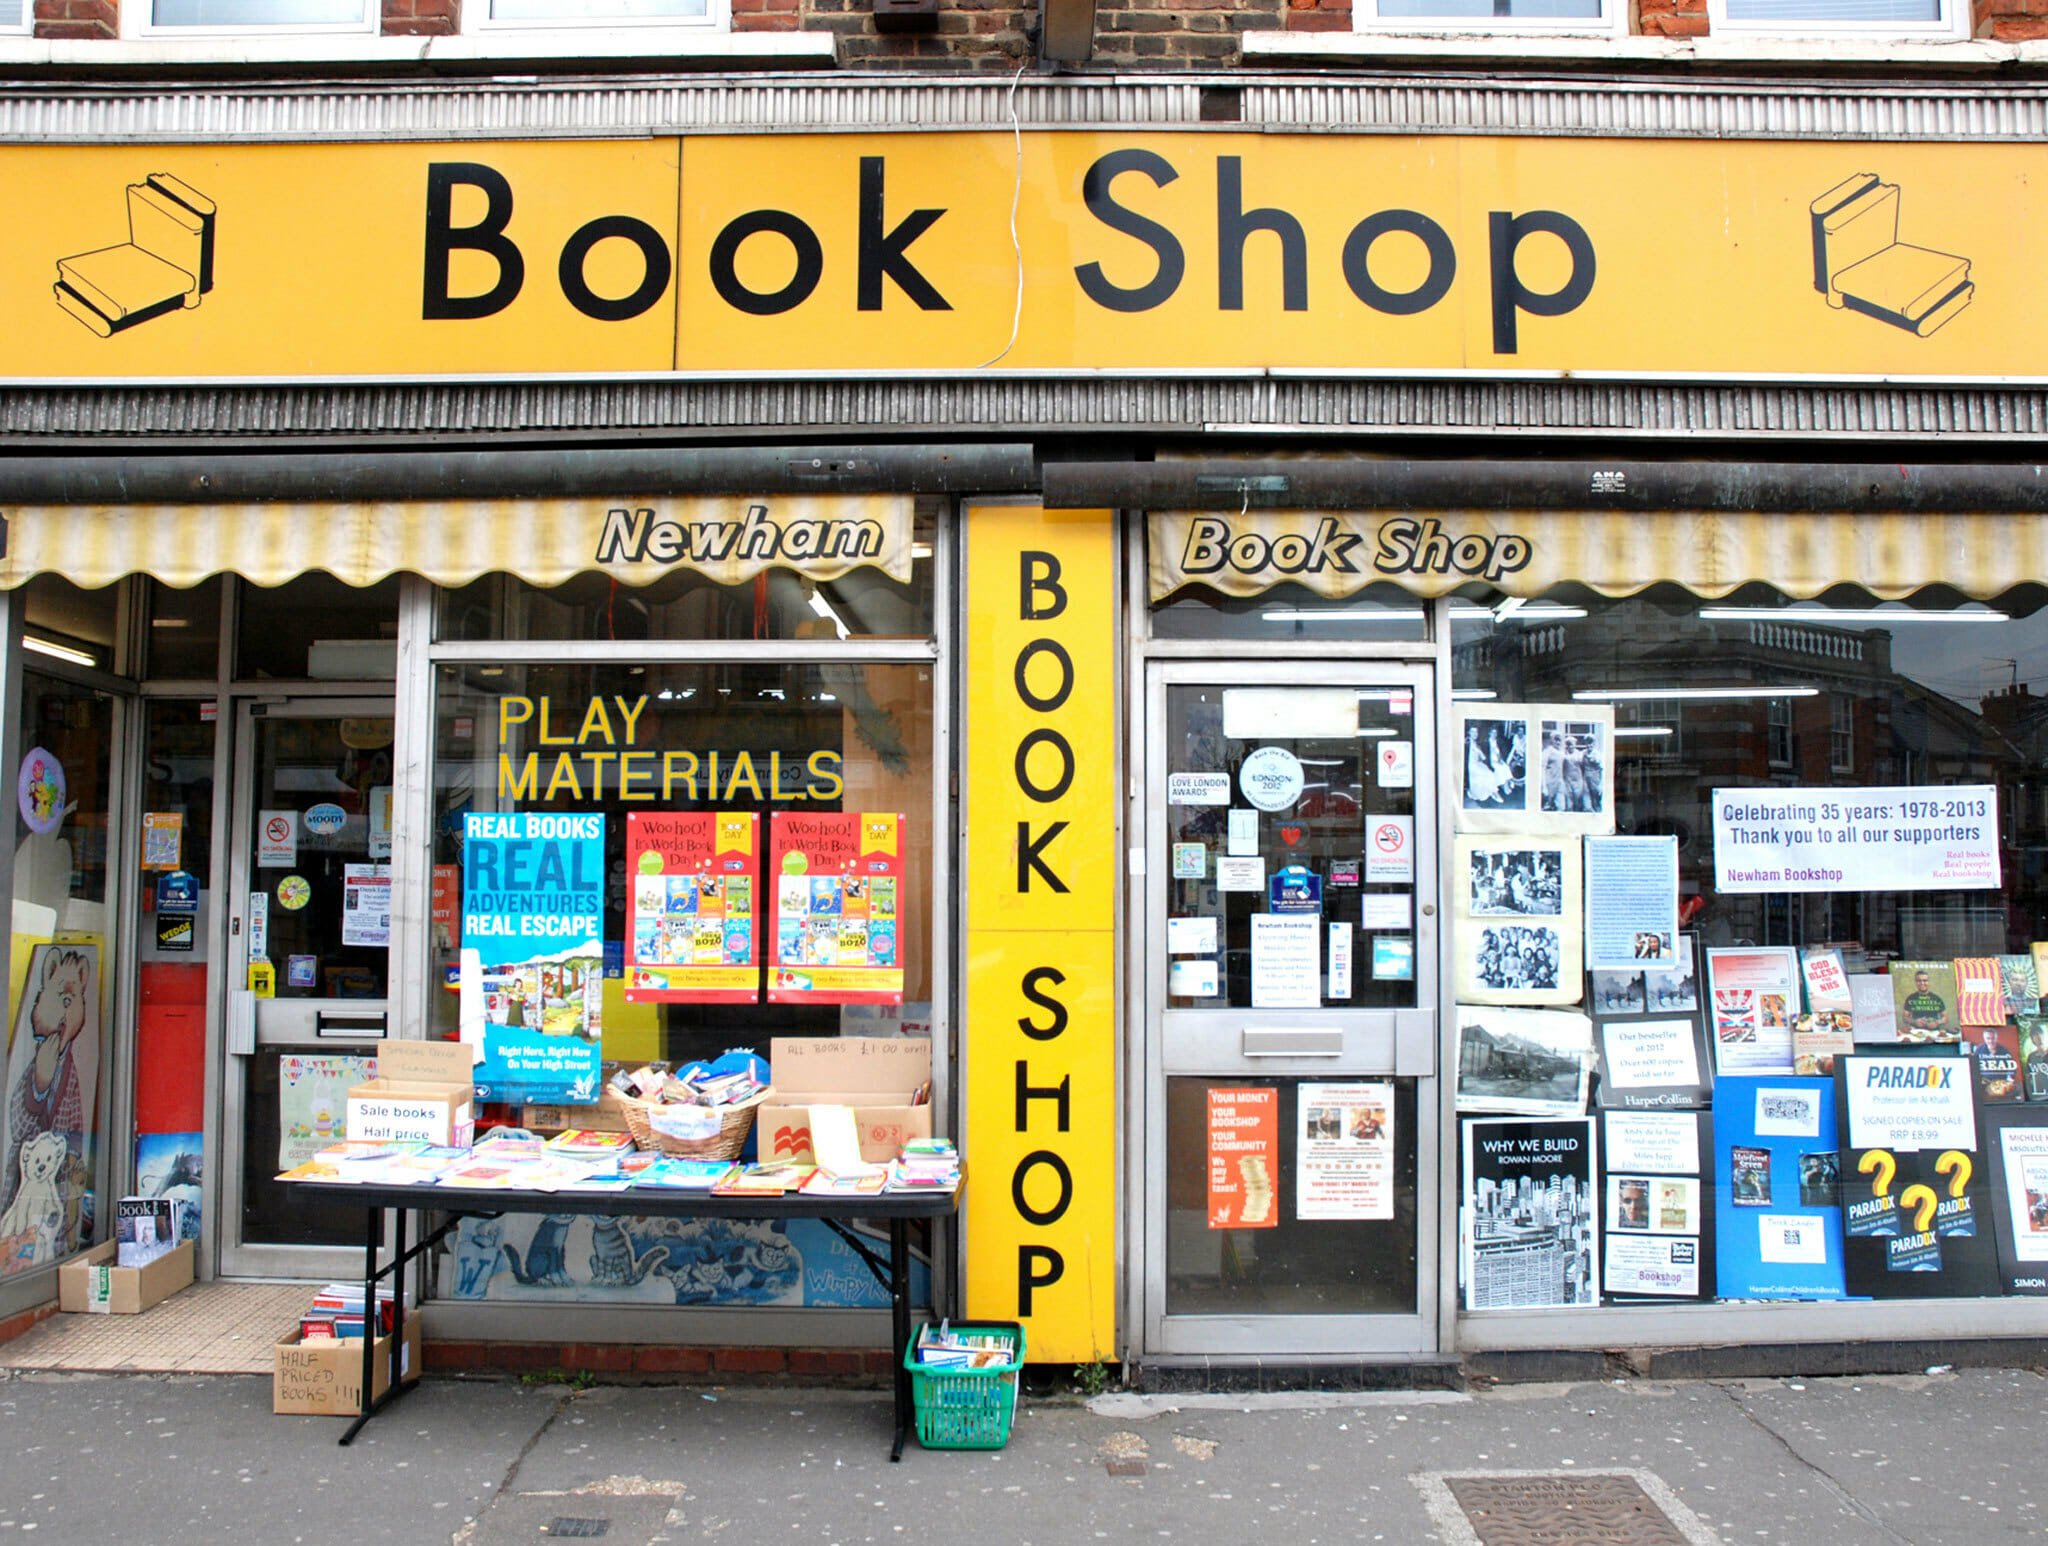 Newham Book Shop delivery